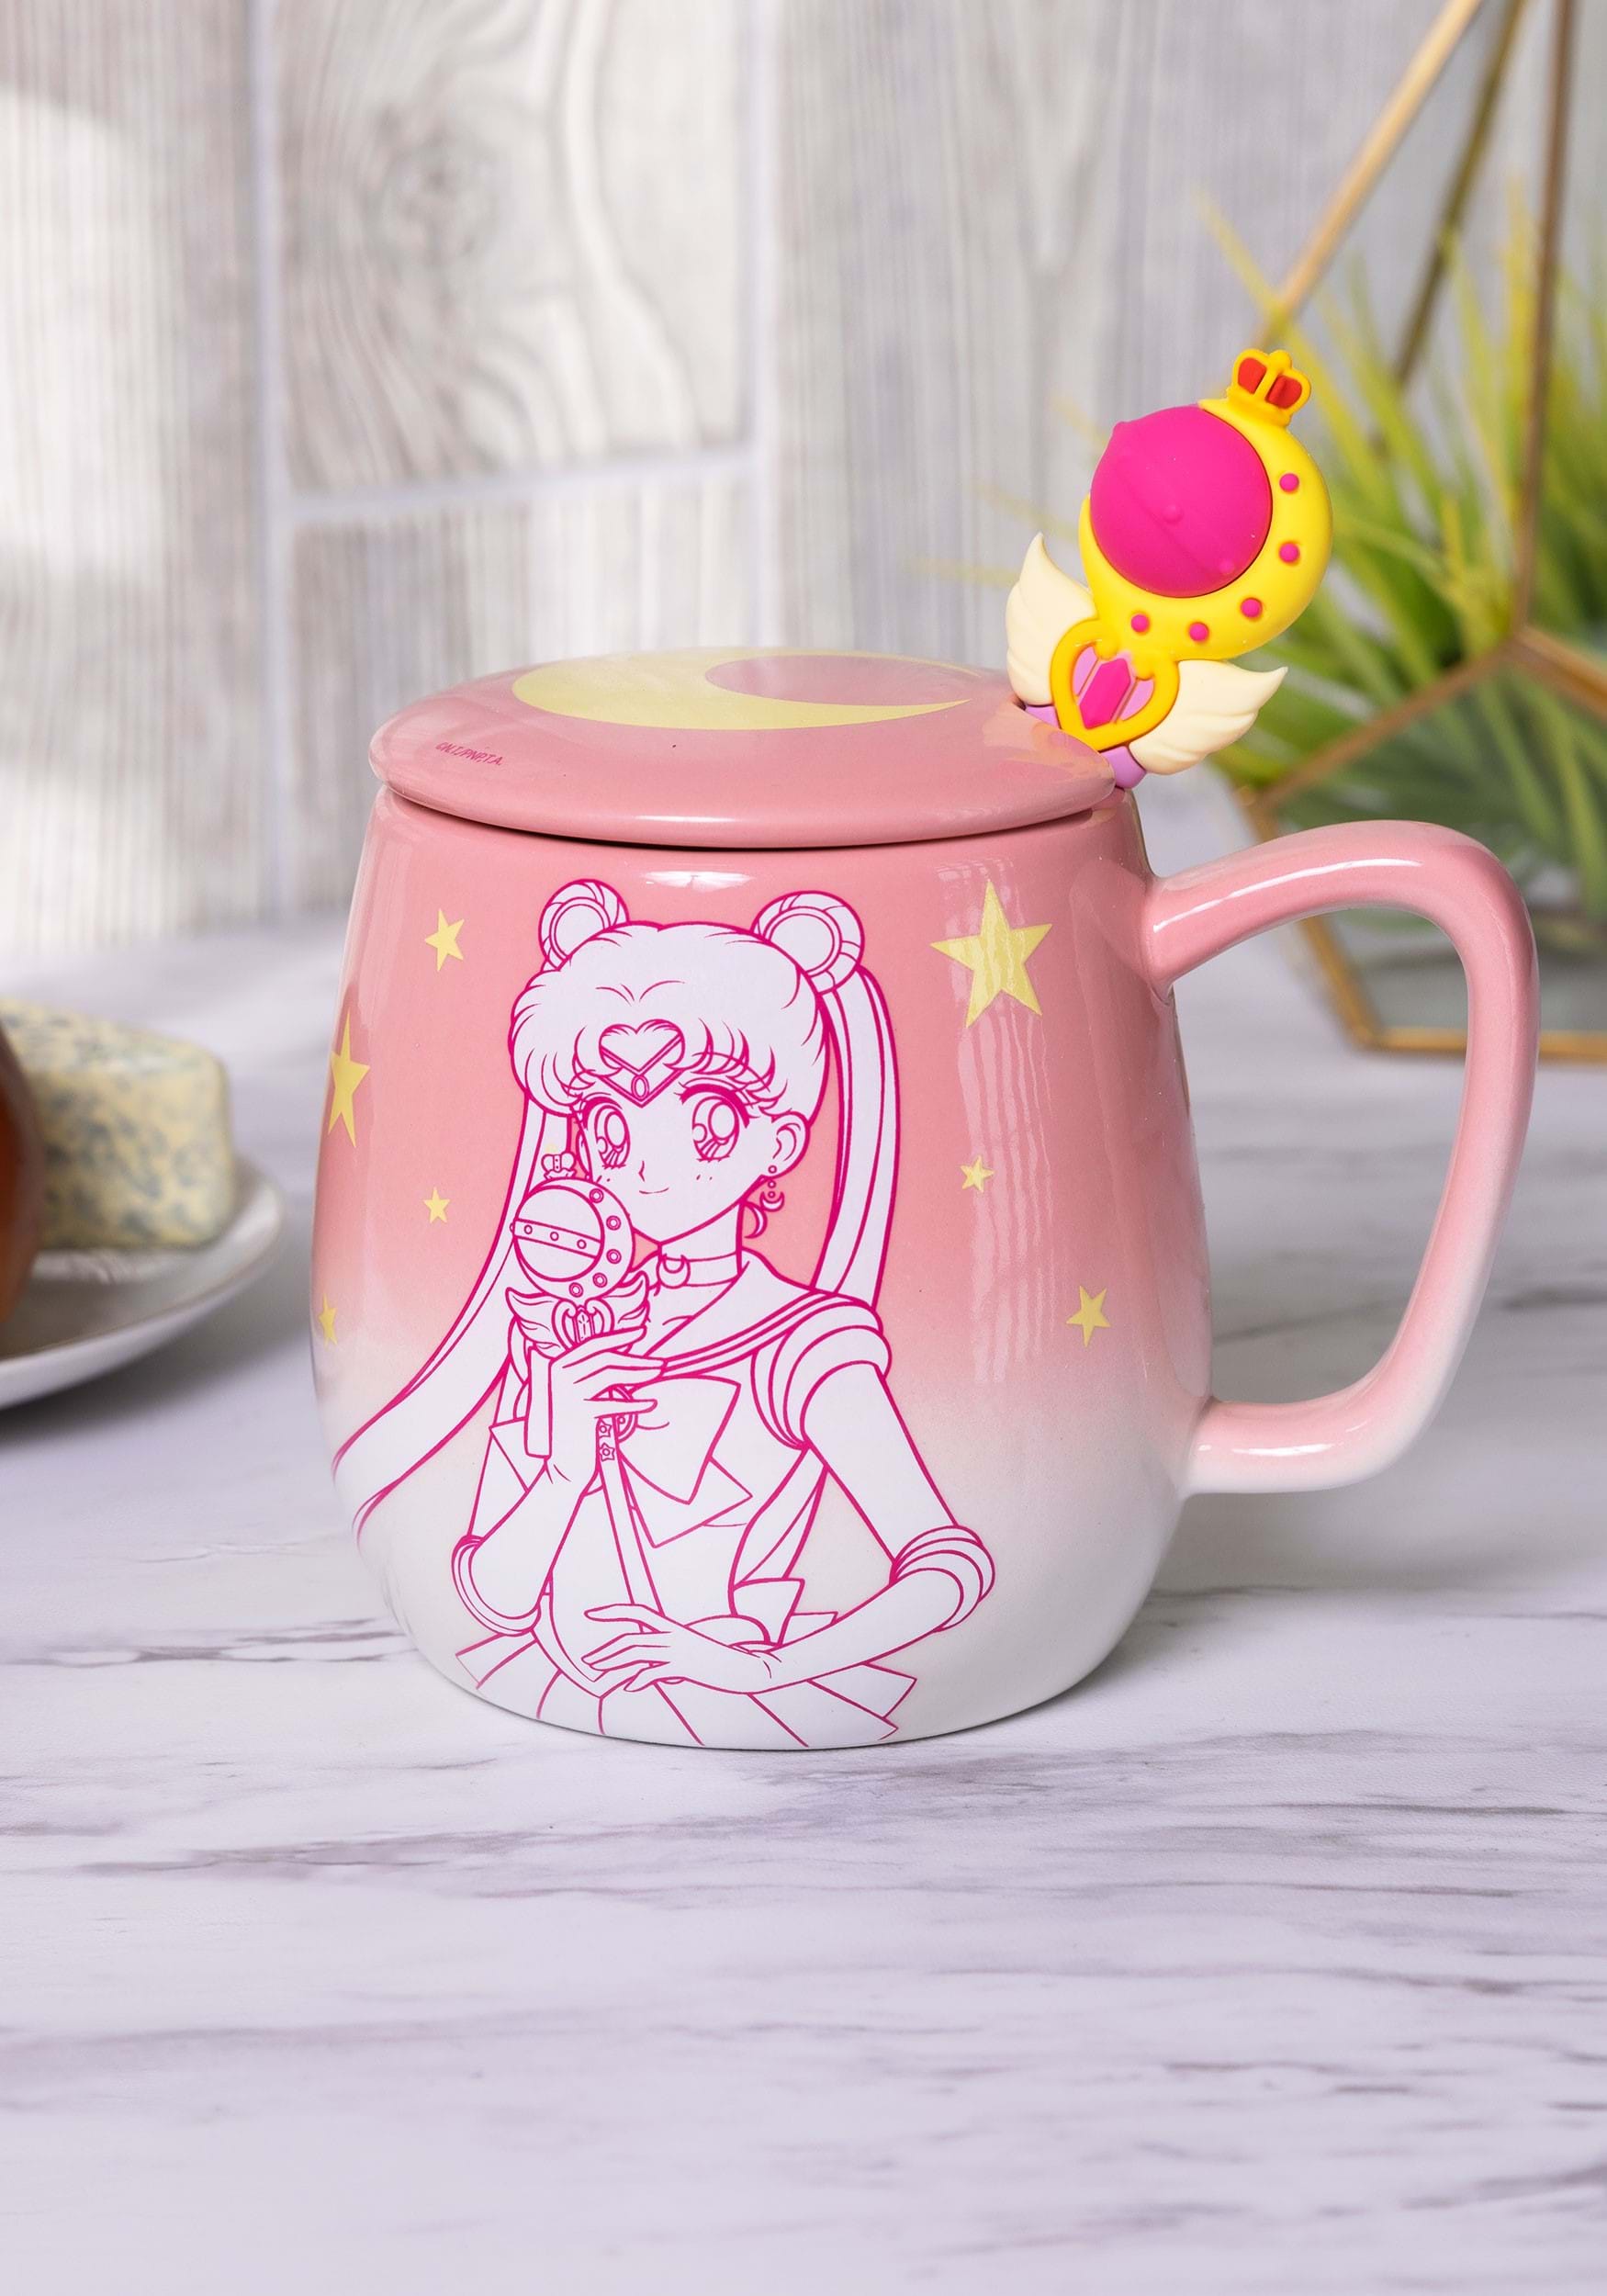 https://images.fun.com/products/88699/2-1-267942/sailor-moon-16oz-ombre-mug-with-molded-spoon-alt-1.jpg